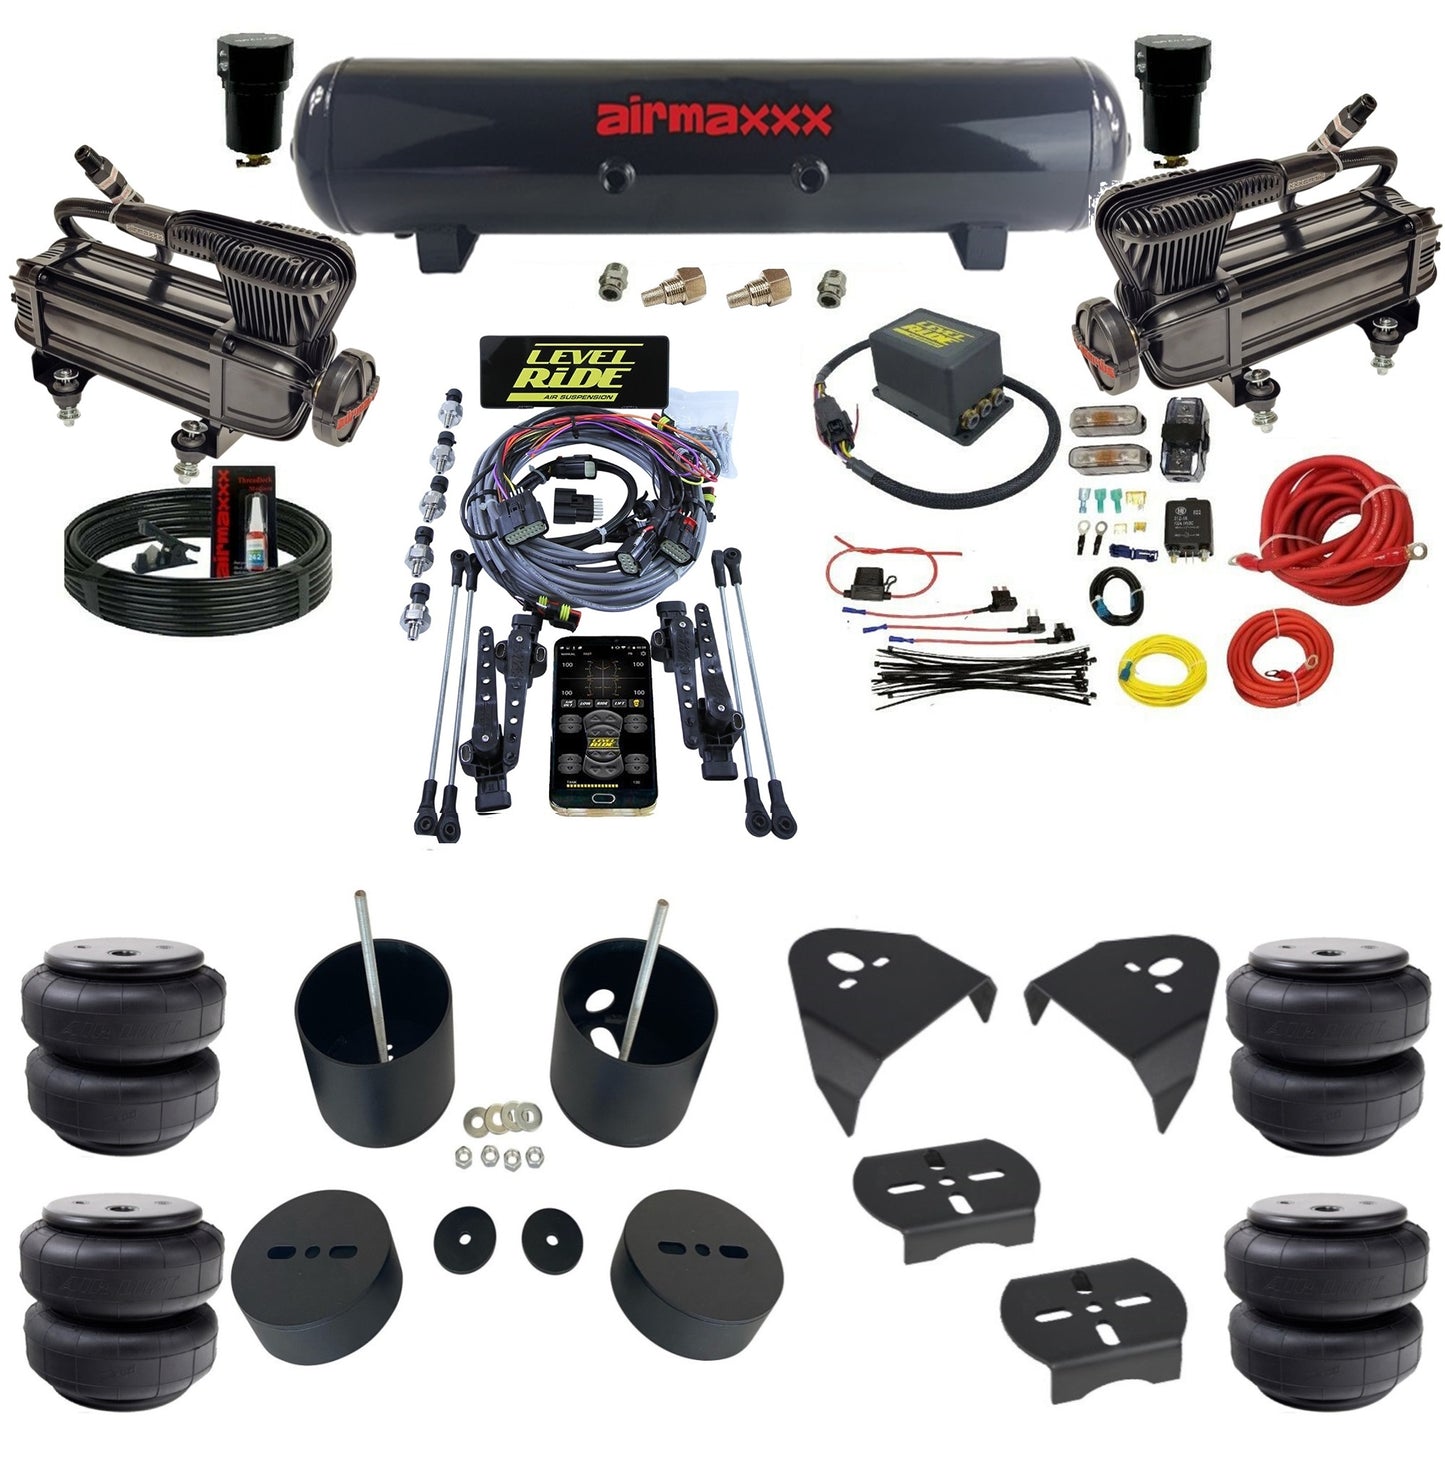 Complete Pressure Height Level Ride w/Black 580 Air Suspension Kit Fits Chevy 1988-98 Silverado 1500